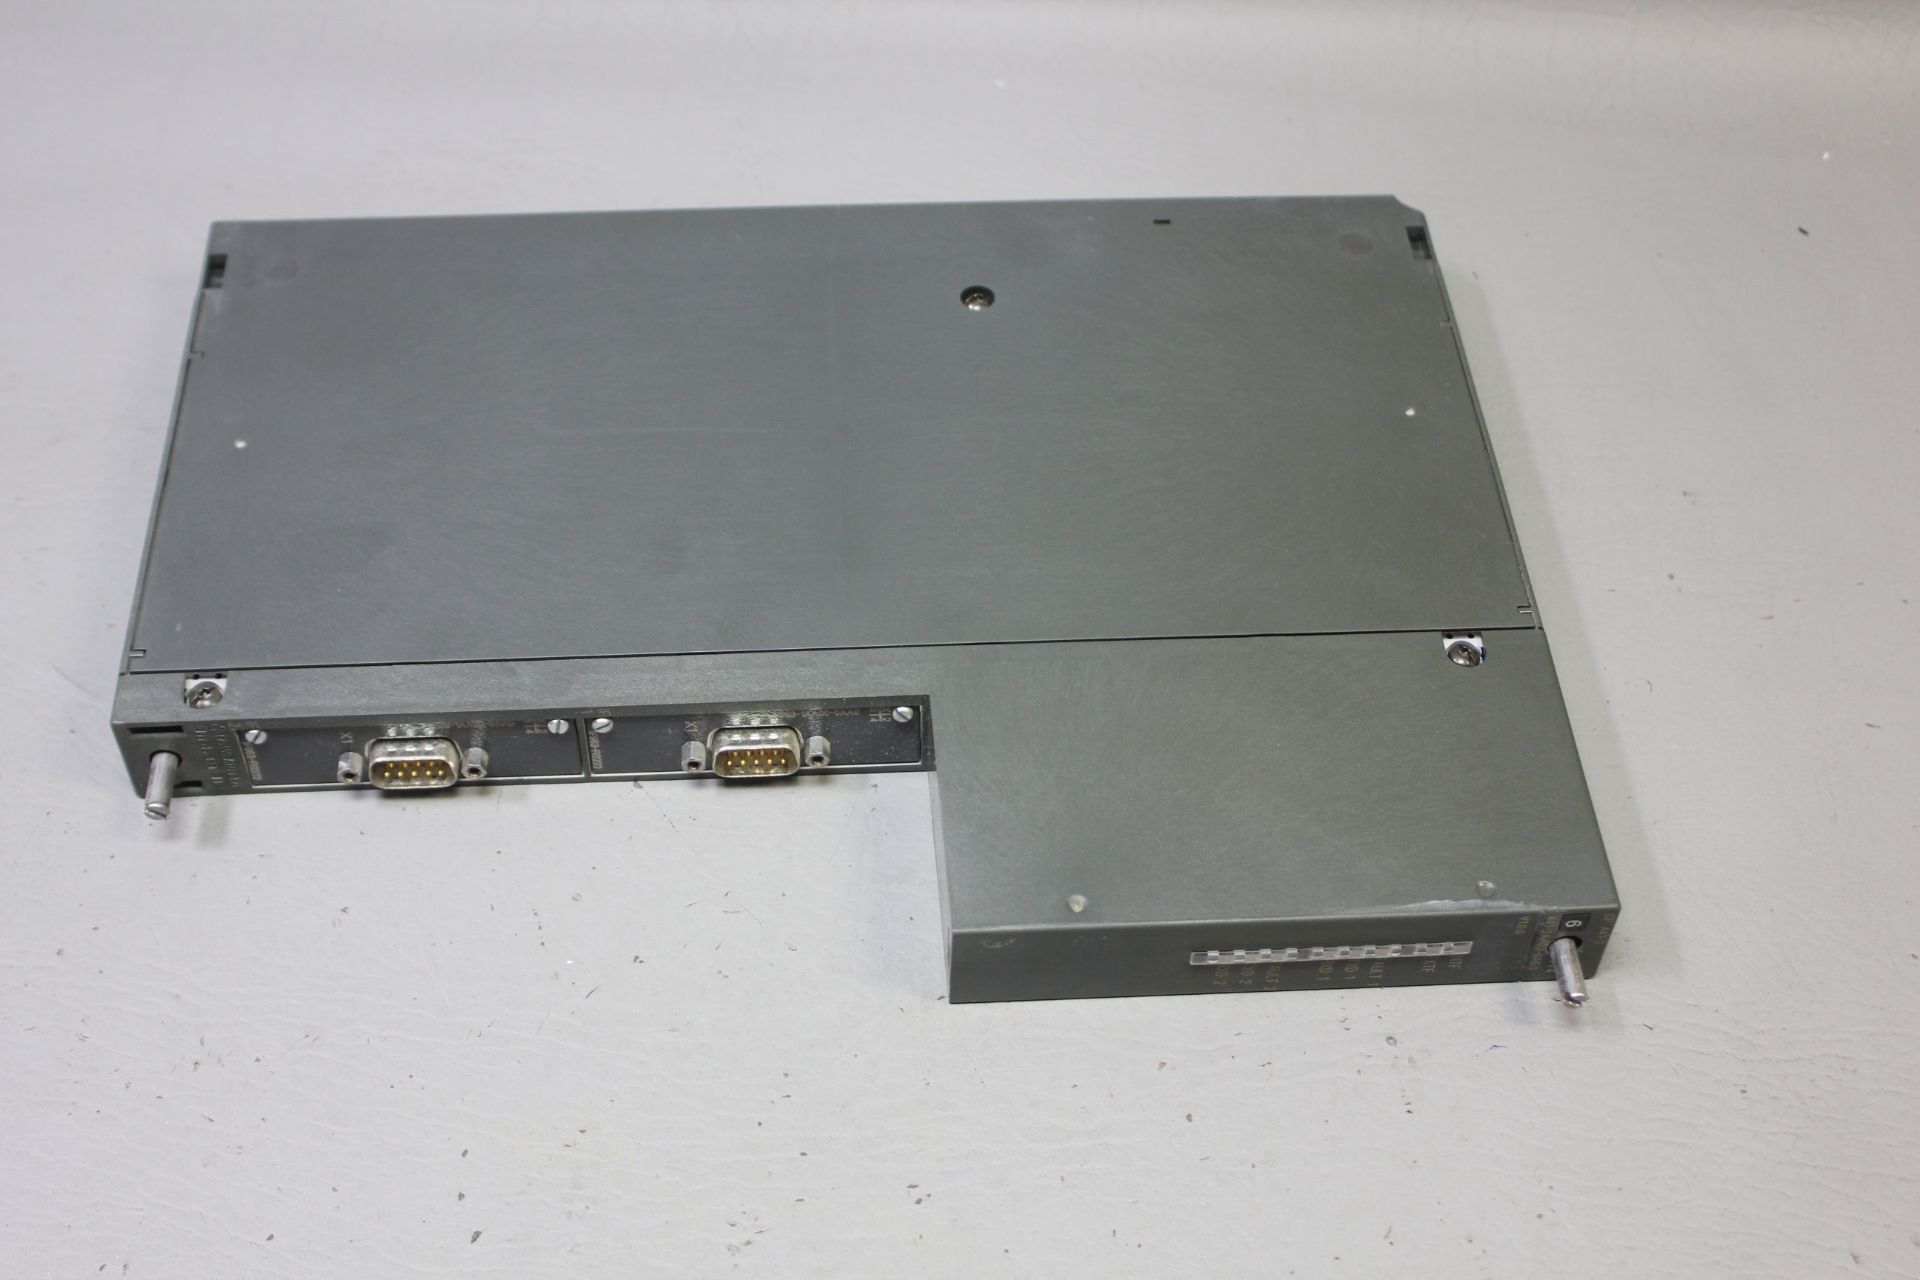 SIEMENS SIMATIC S7 COMM MODULE WITH 2 RS232 MODULES - Image 3 of 4